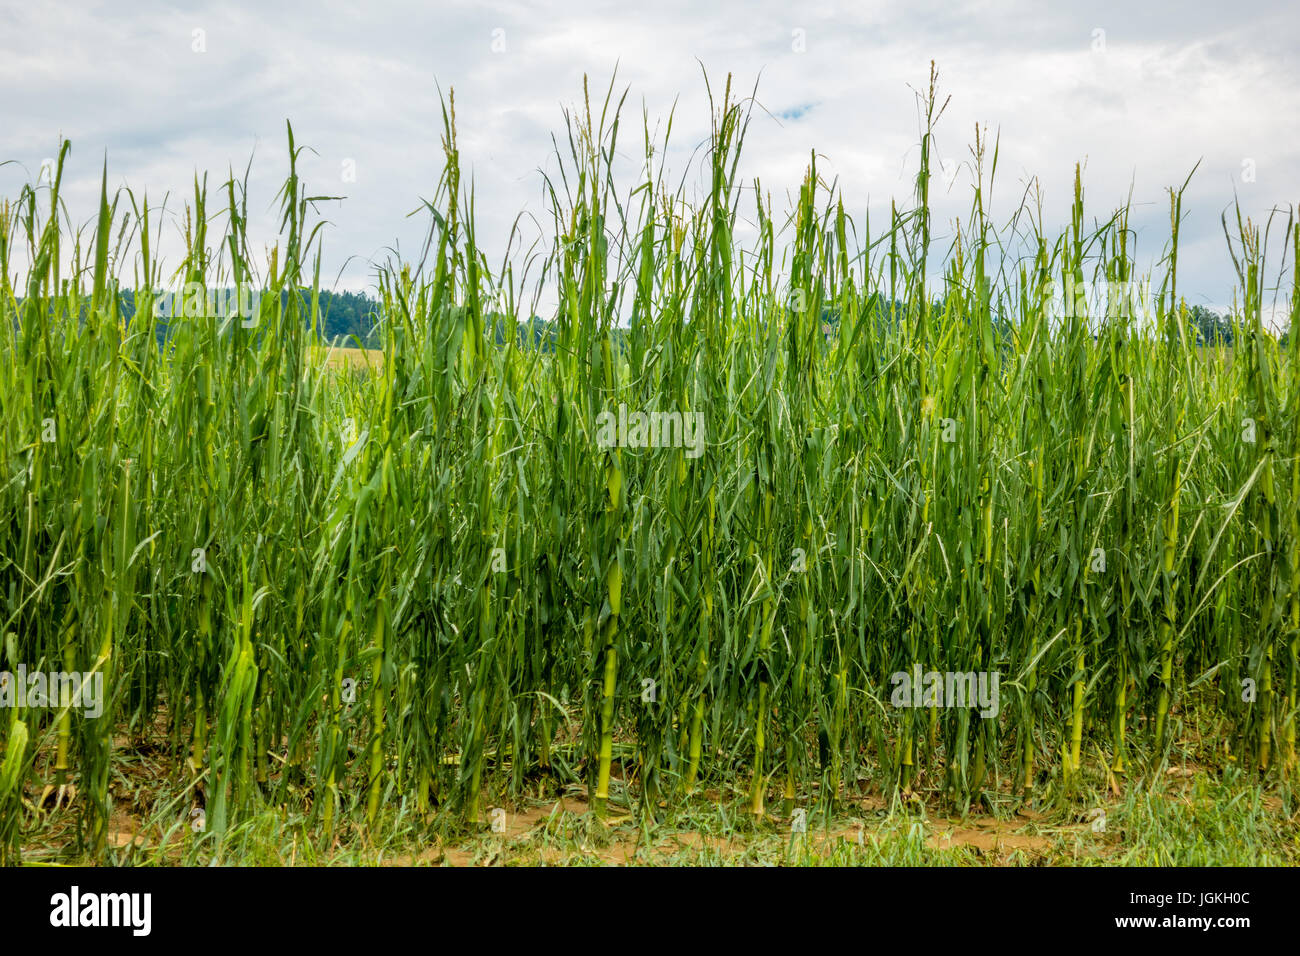 Corn field severly damaged in heavy storm with hail, crops ruined, corn leaves shredded by hail and lying on ground Stock Photo